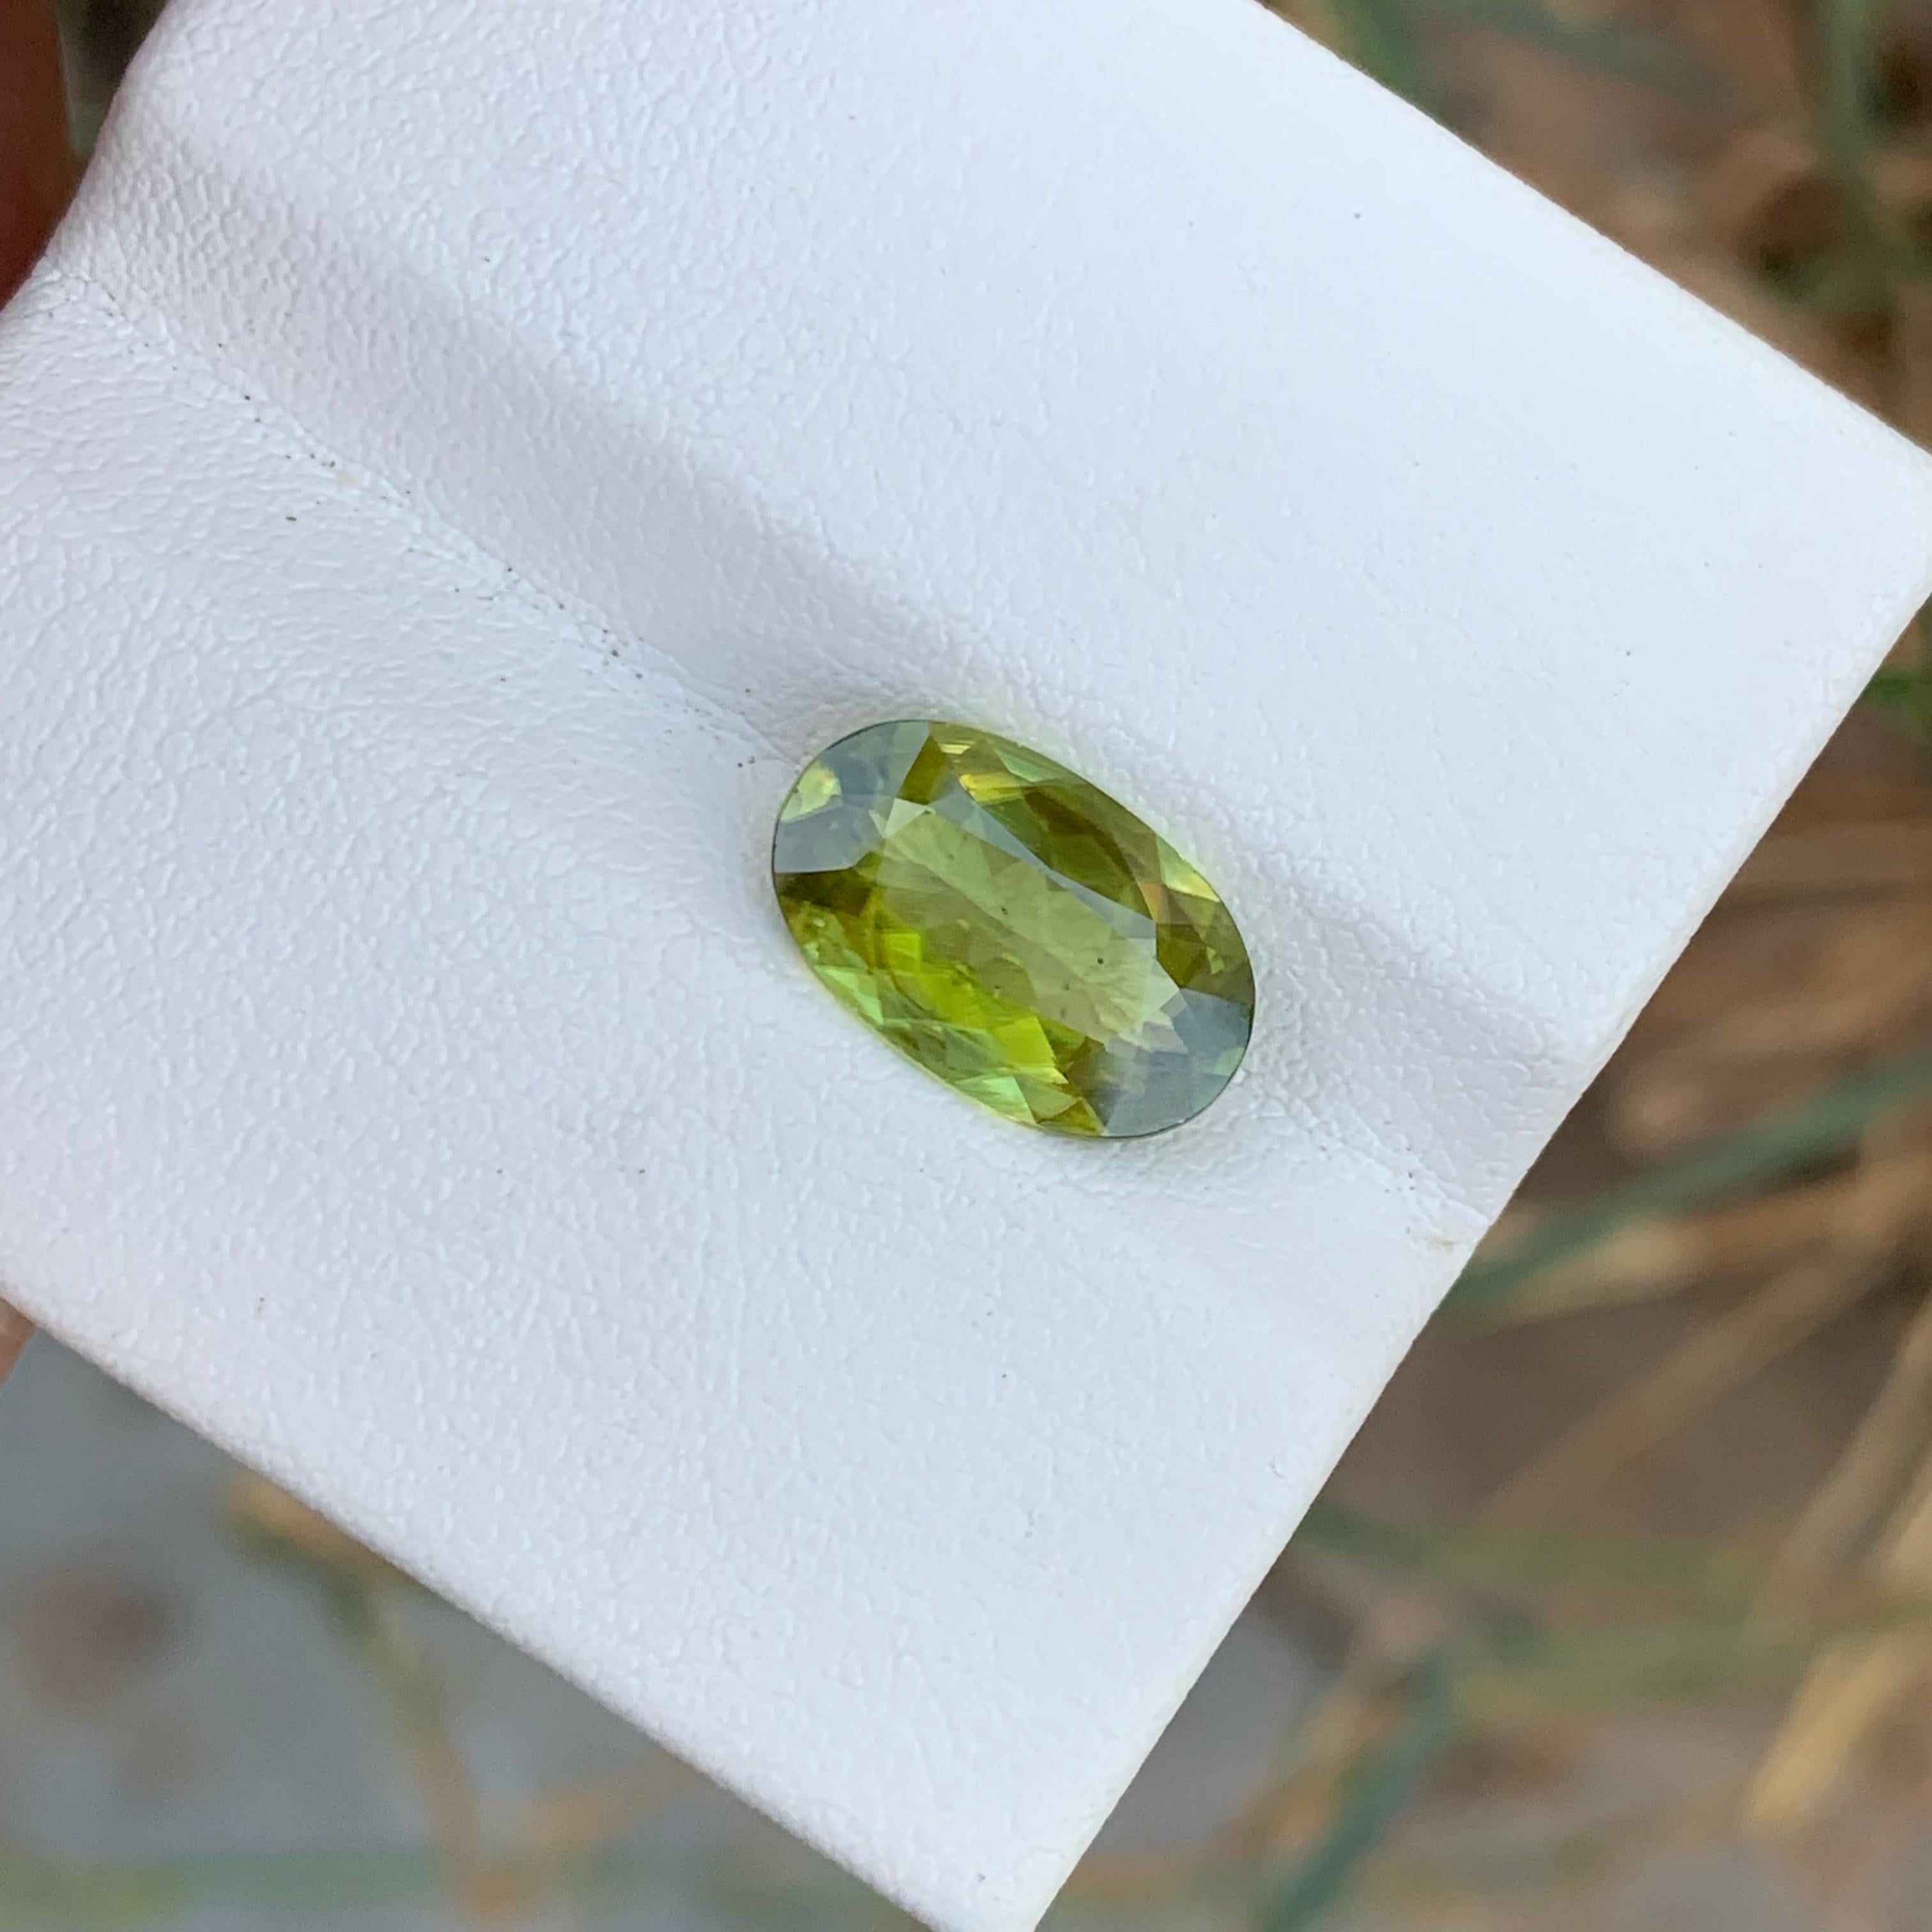 Faceted Sphene
Weight: 3.10 Carats 
Dimension: 10.6x7.4x5.8 Mm
Origin: Warsak Pakistan 
Color: Yellow Green With Fire Effect
Shape: Oval
Treatment: Non
Certificate: On Customer Demand 
Sphene, also known as titanite, is a rare and stunningly